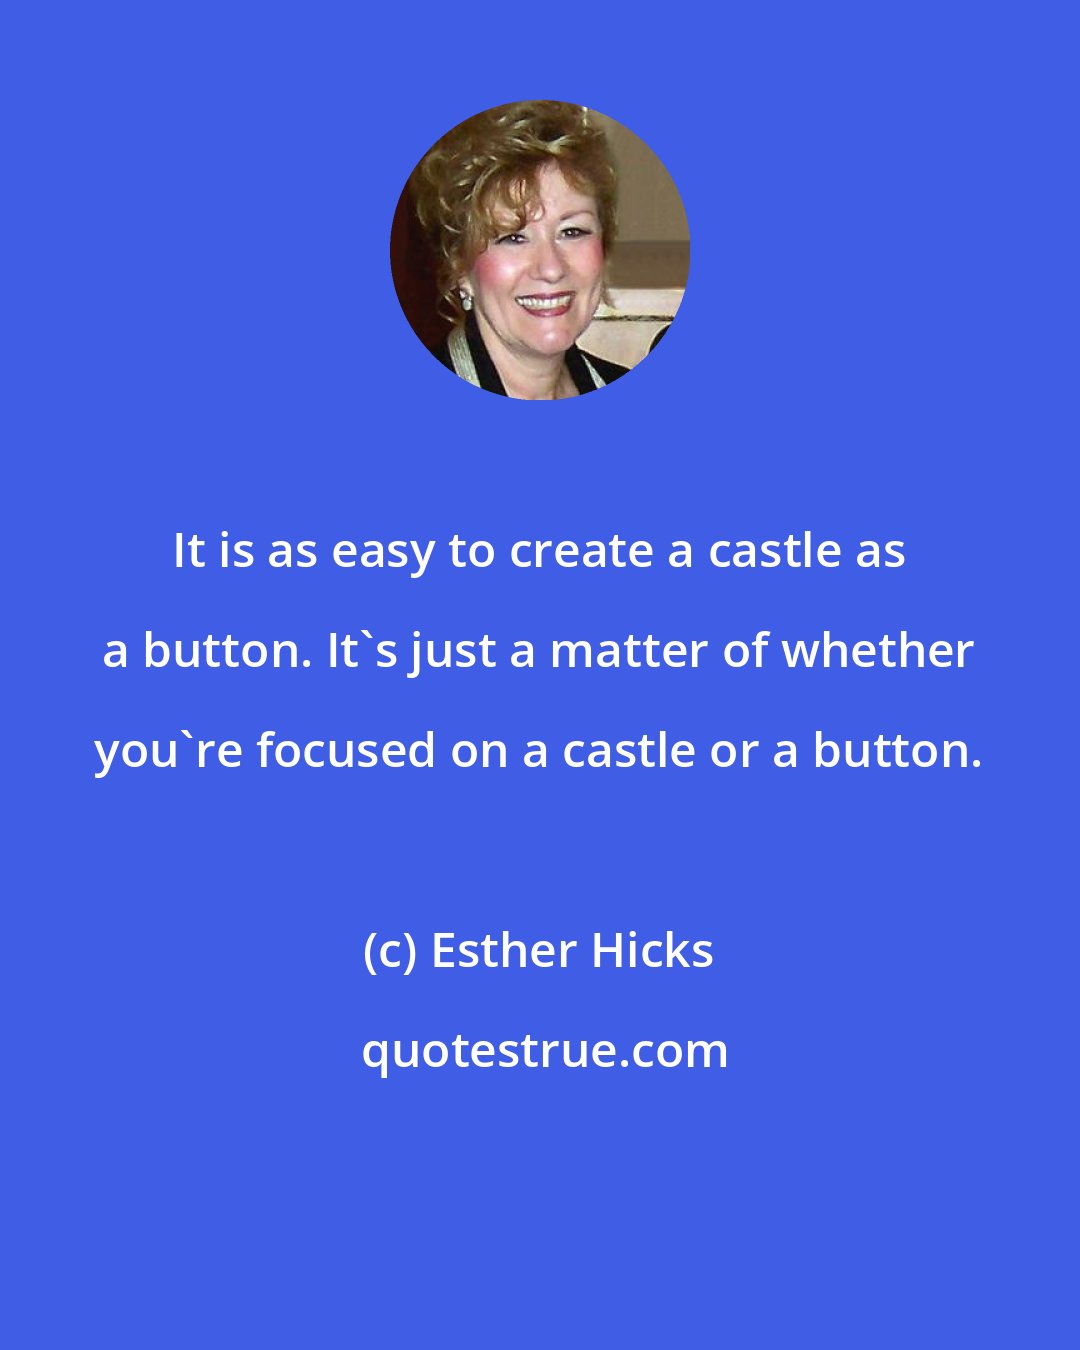 Esther Hicks: It is as easy to create a castle as a button. It's just a matter of whether you're focused on a castle or a button.